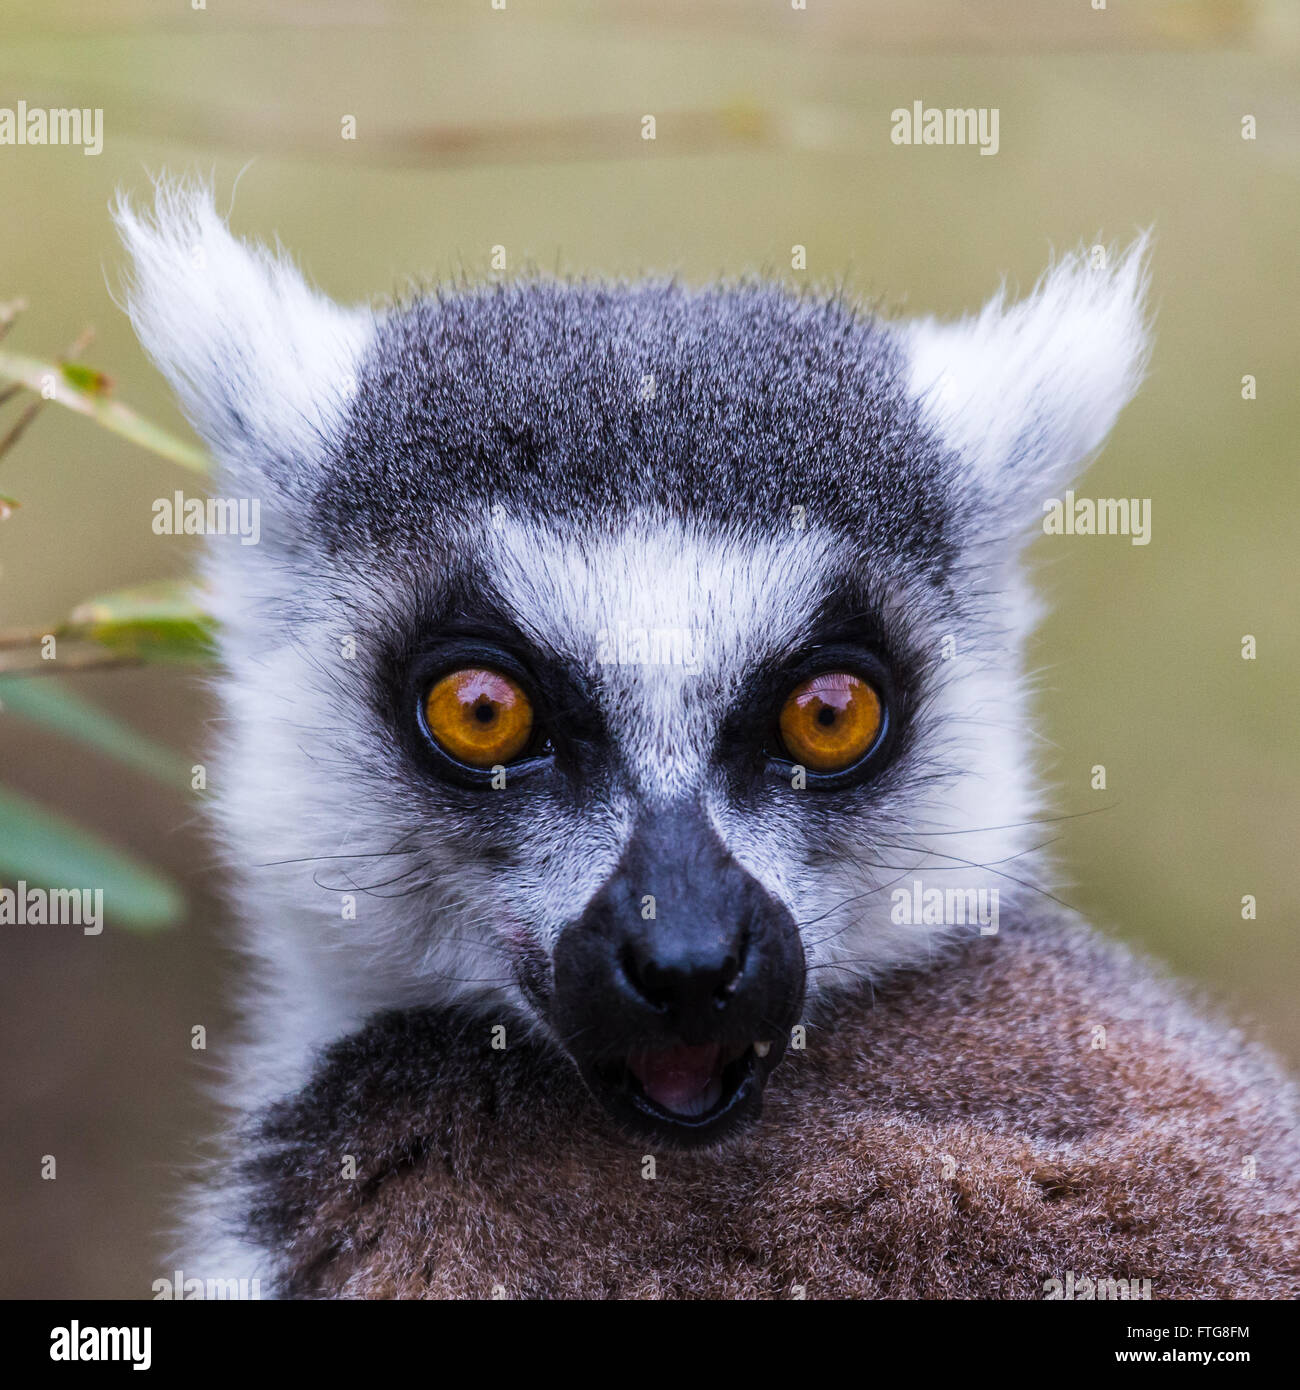 Square cropped close-up portrait of a Ring-tailed lemur as it pauses from a feed in Norfolk. Stock Photo